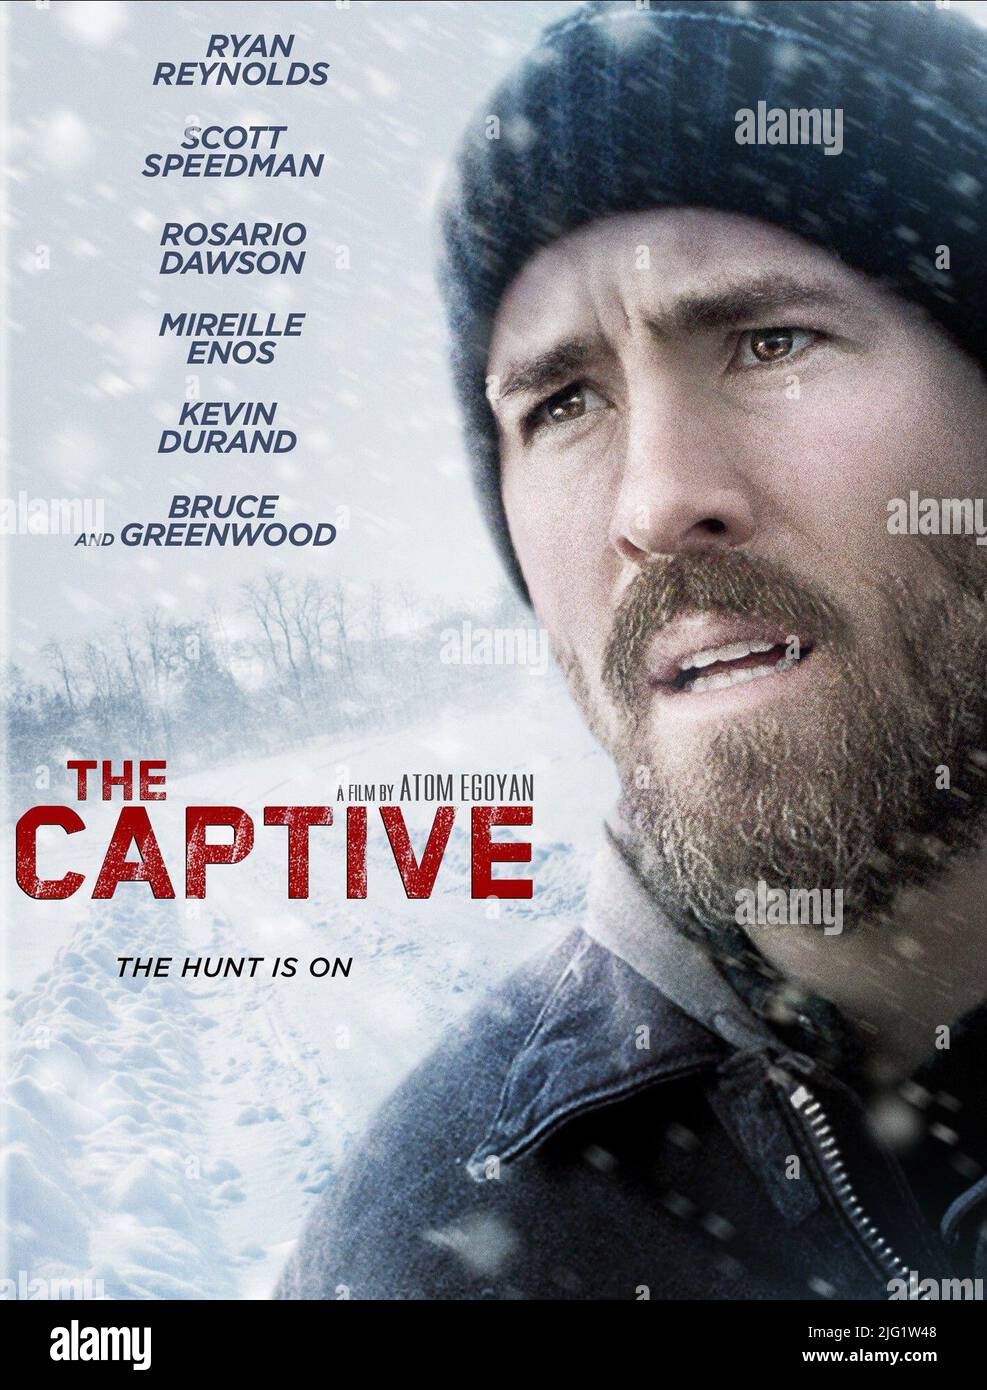 Cannes 2014: First Look At Atom Egoyan's The Captive, Movies